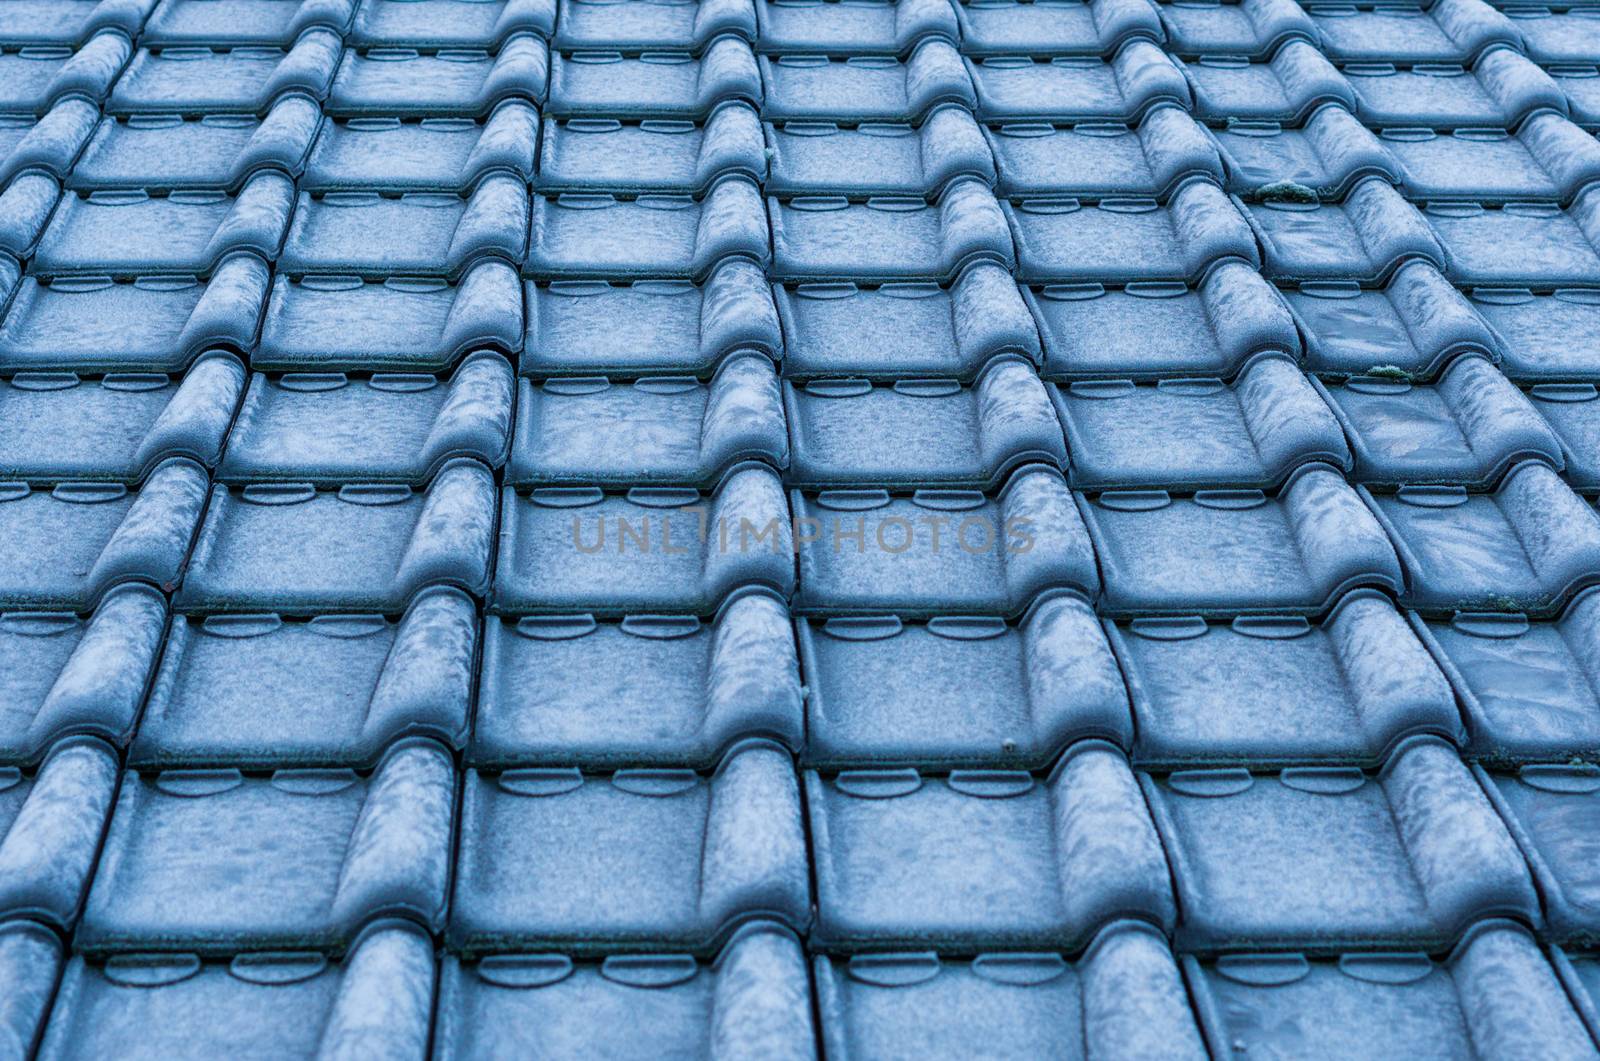 macro closeup of icy rooftop tiling covered in snow crystals, cold winter season, architecture background by charlottebleijenberg